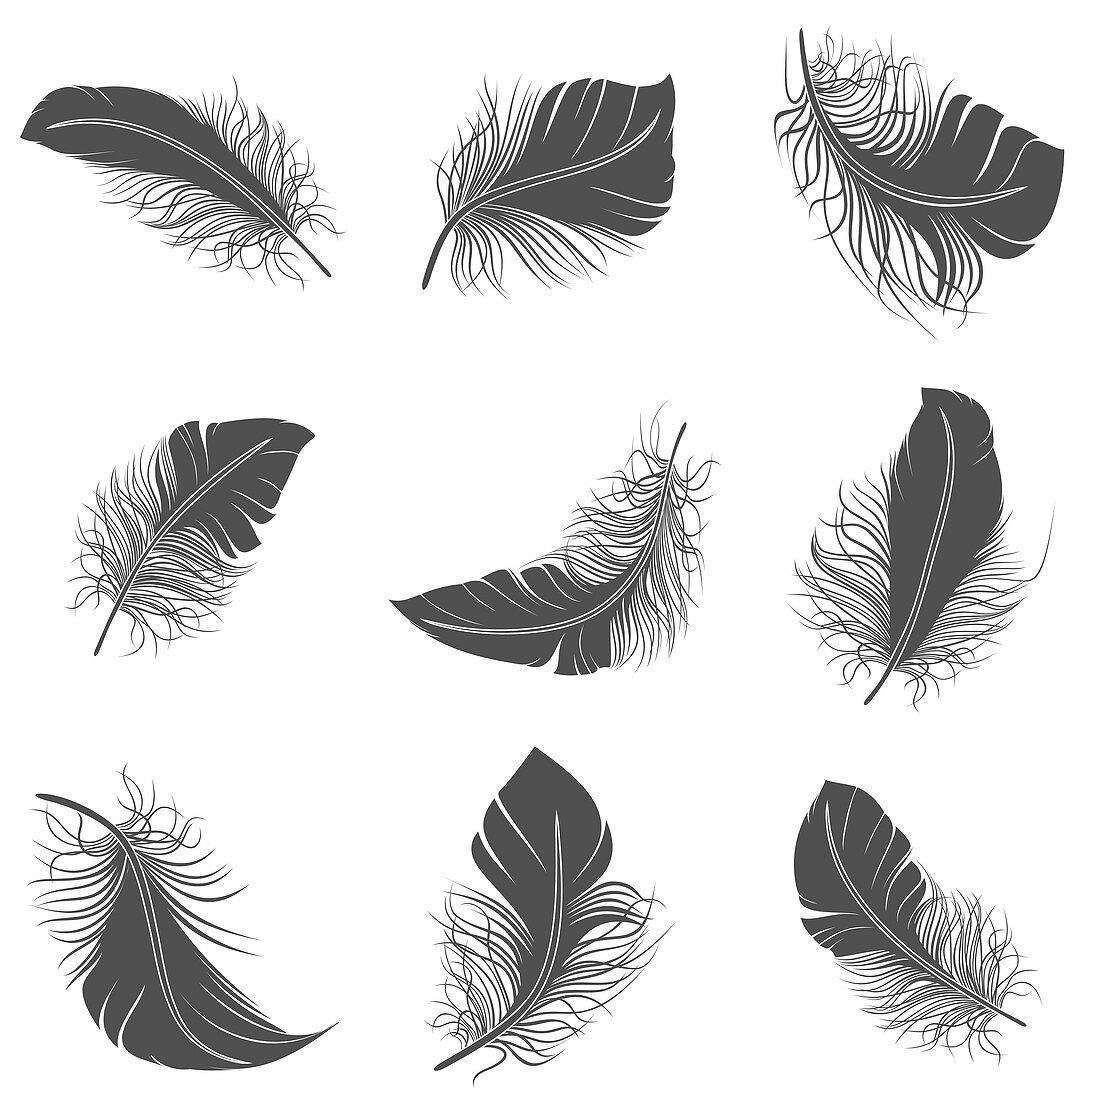 Feather icons, illustration